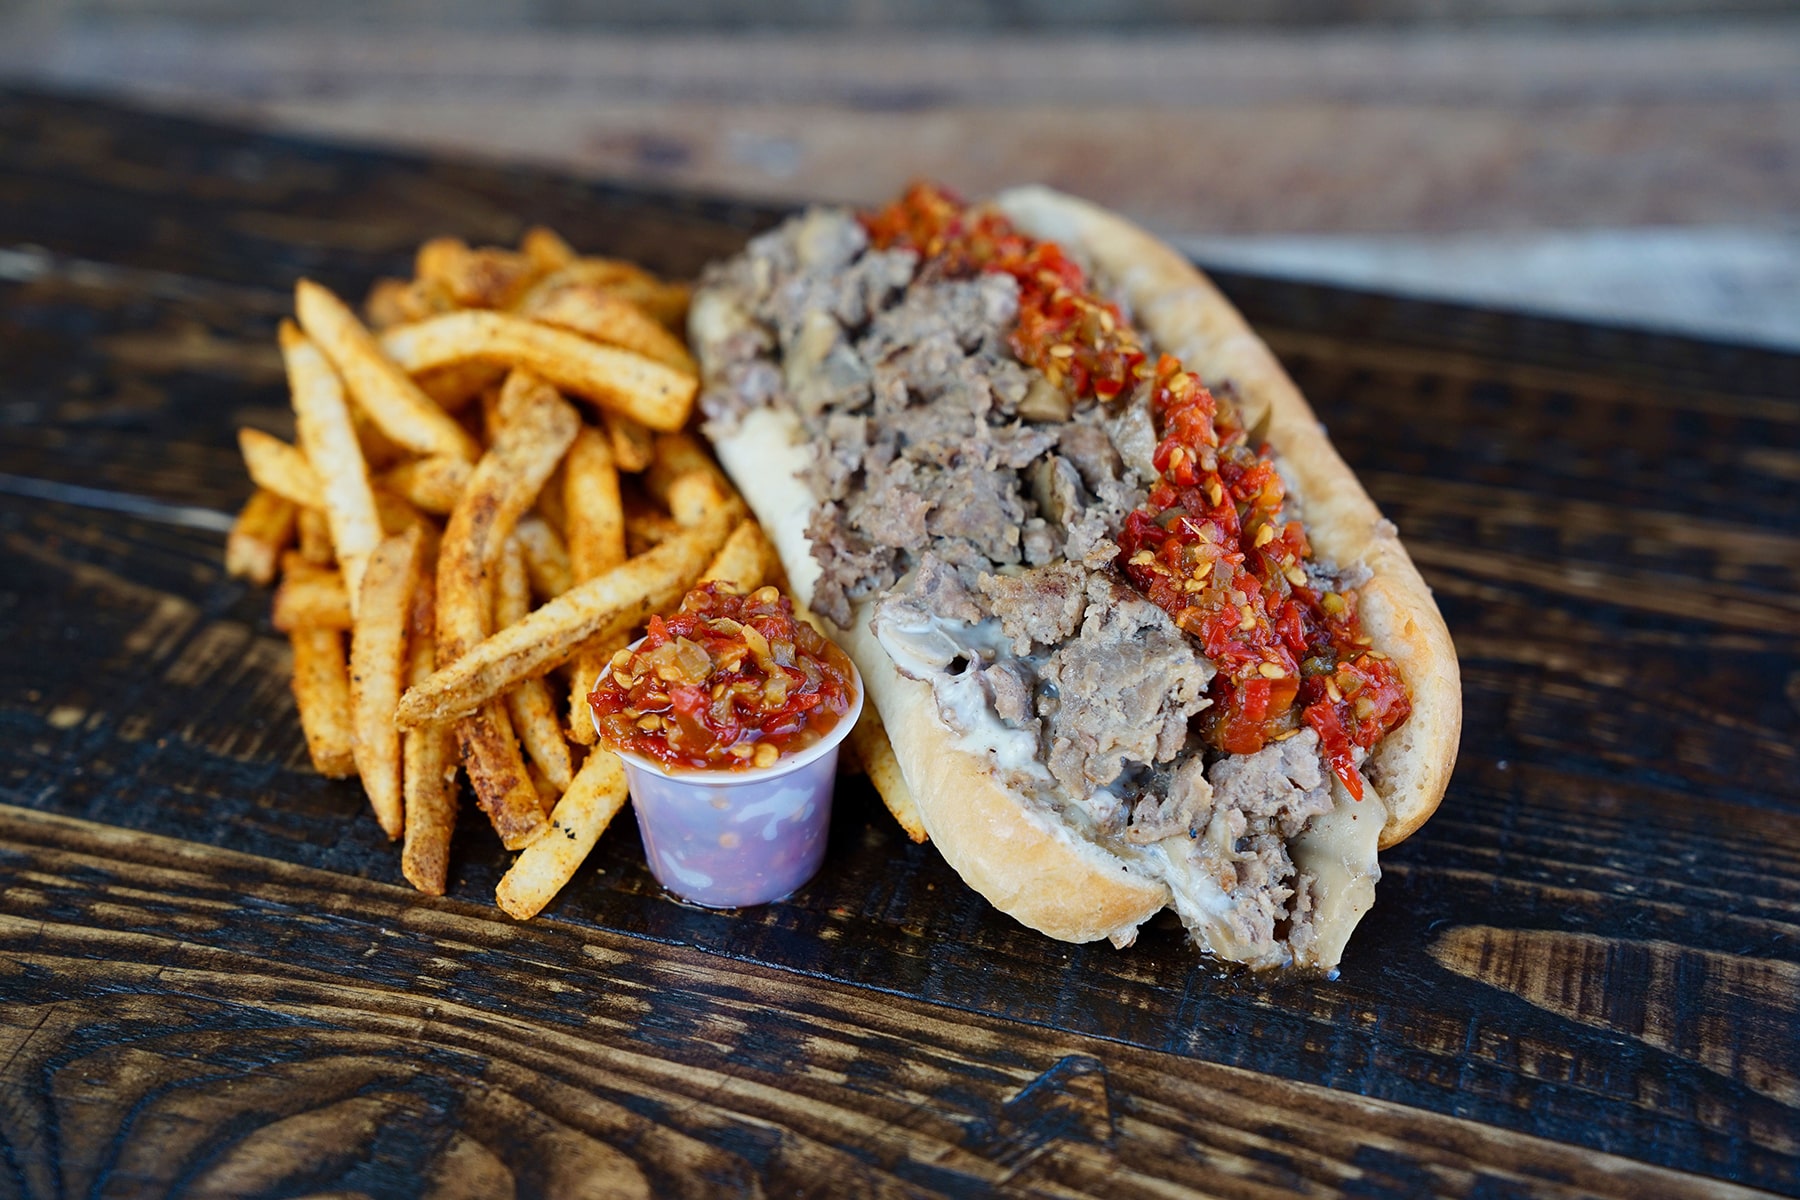 LEFTY'S FAMOUS CHEESESTEAKS